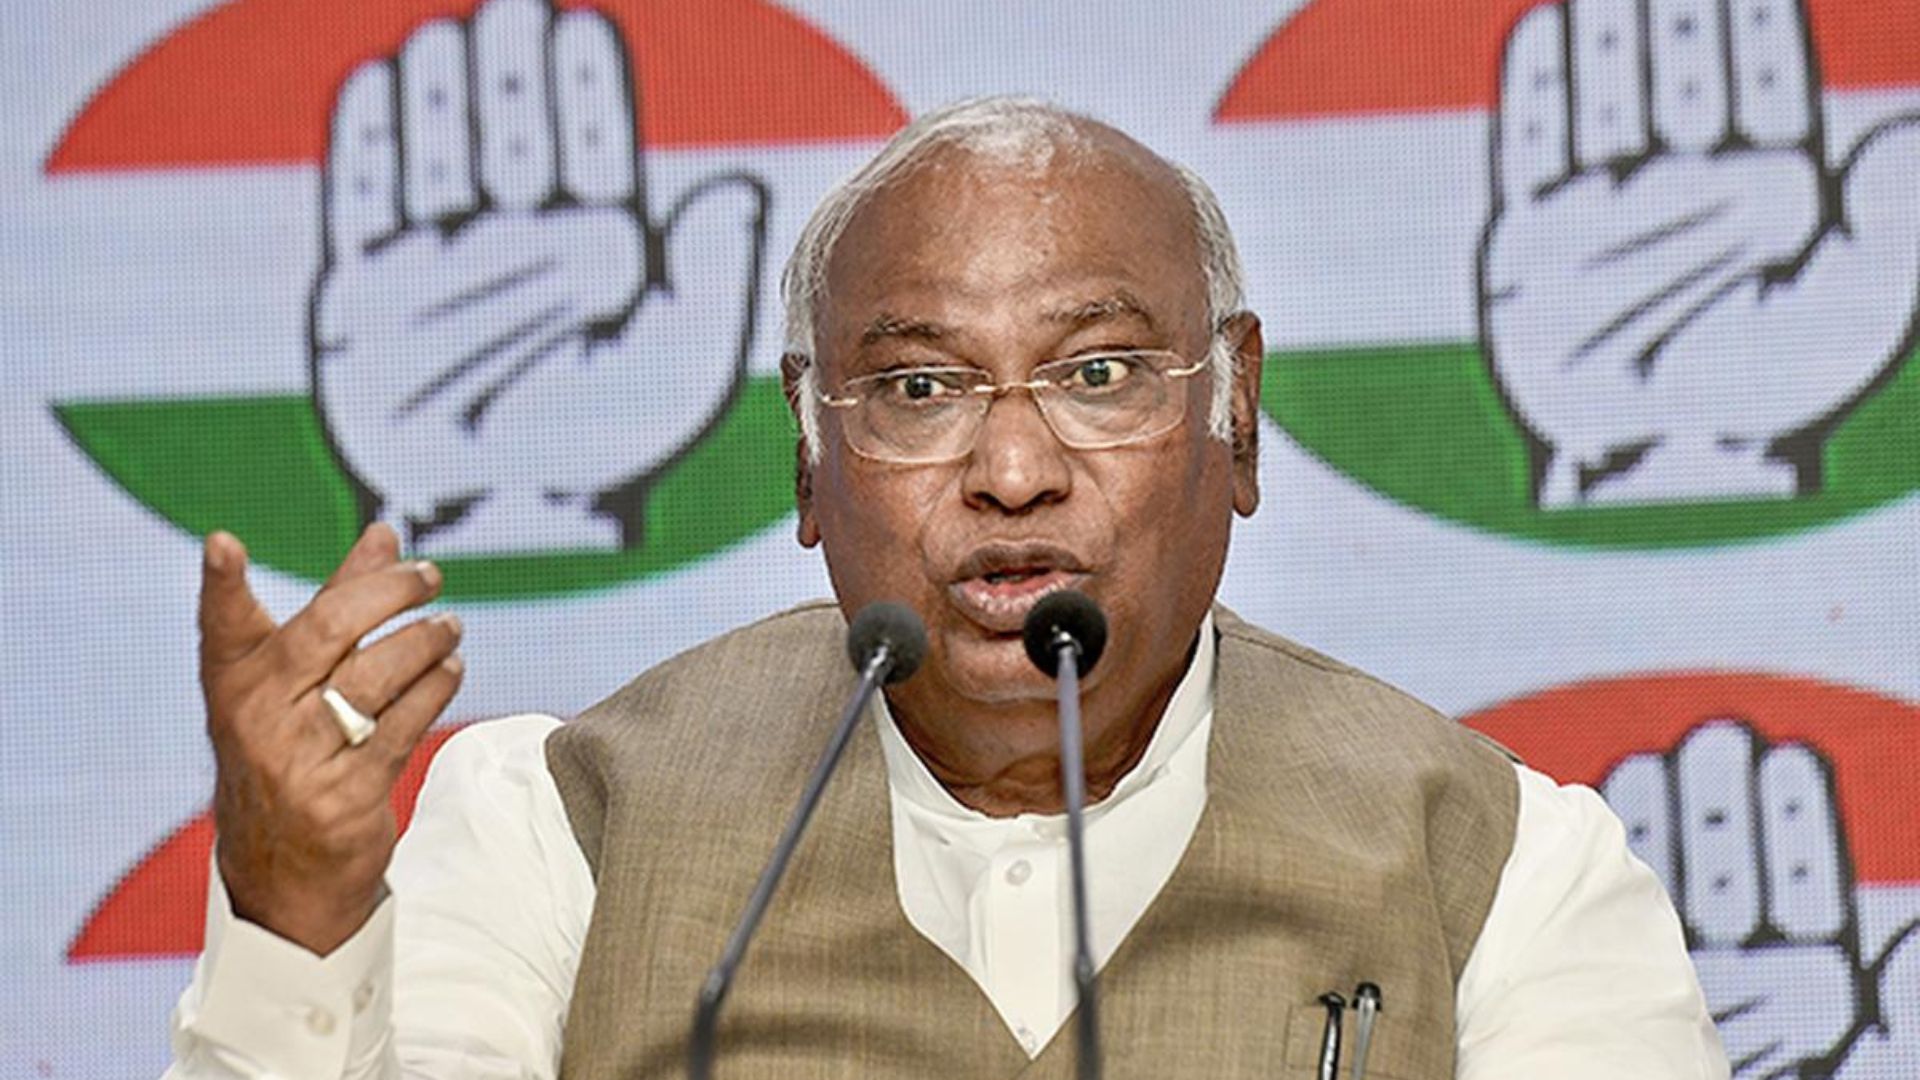 NEET UG Row: Congress Leader Kharge Slams Modi Govt, ‘Despicable Attempt To Trample Future Of Youth’